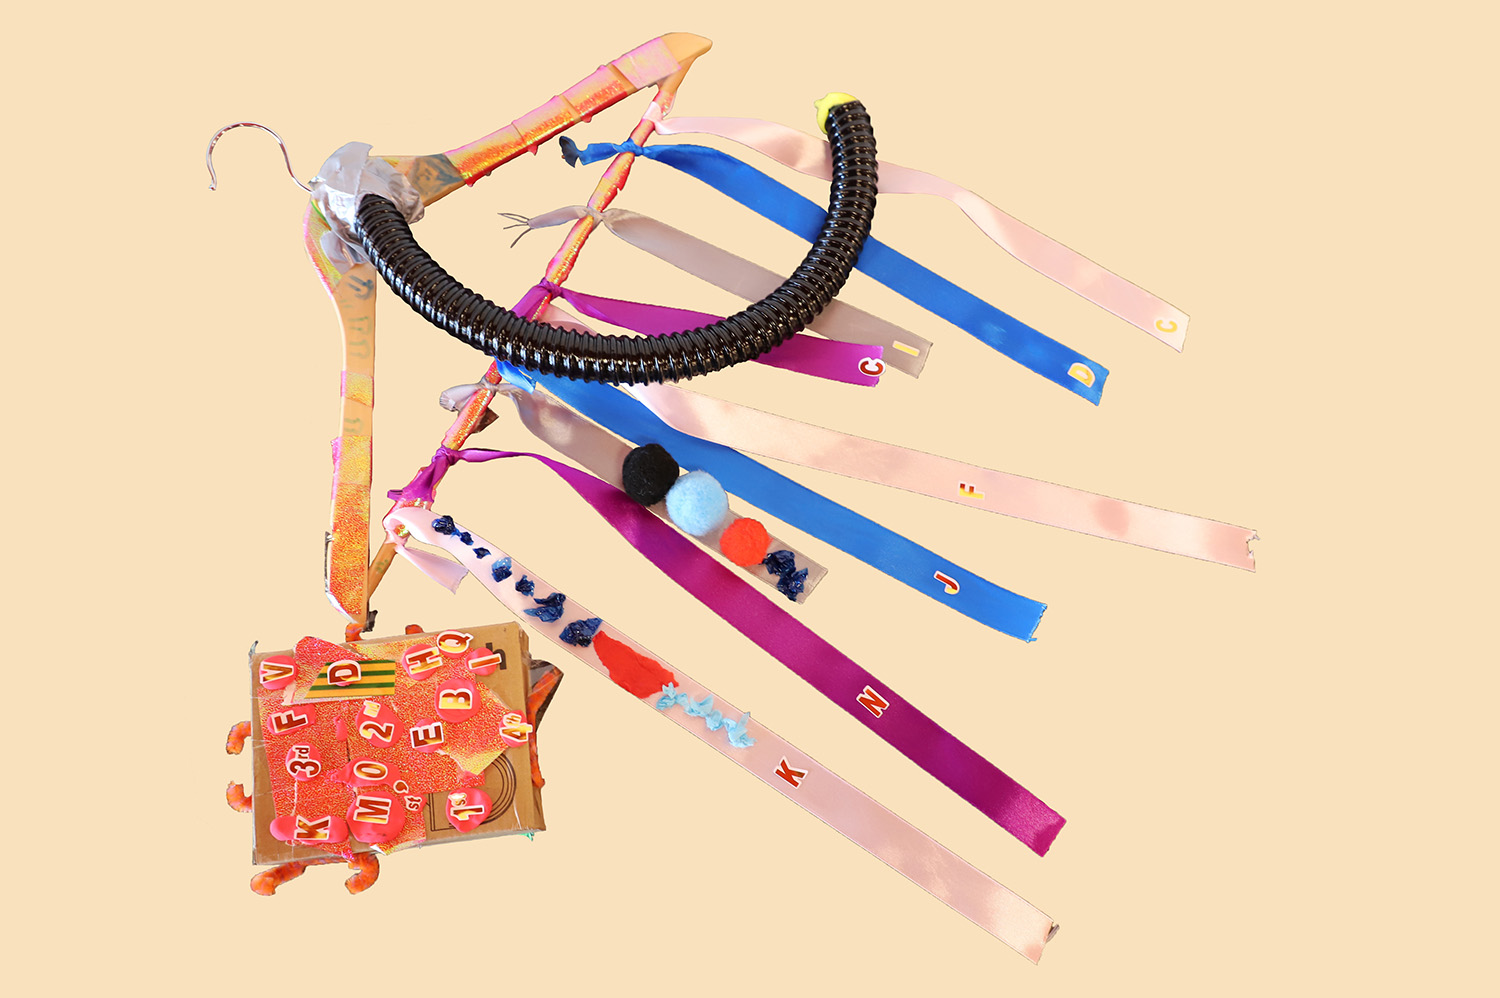 Hanger with multiple colourful ribbons attached, as well as a black tube. Next to it is as book-like object made out of cardboard with letters stuck on the front and orange pipe cleaners sticking out of it.